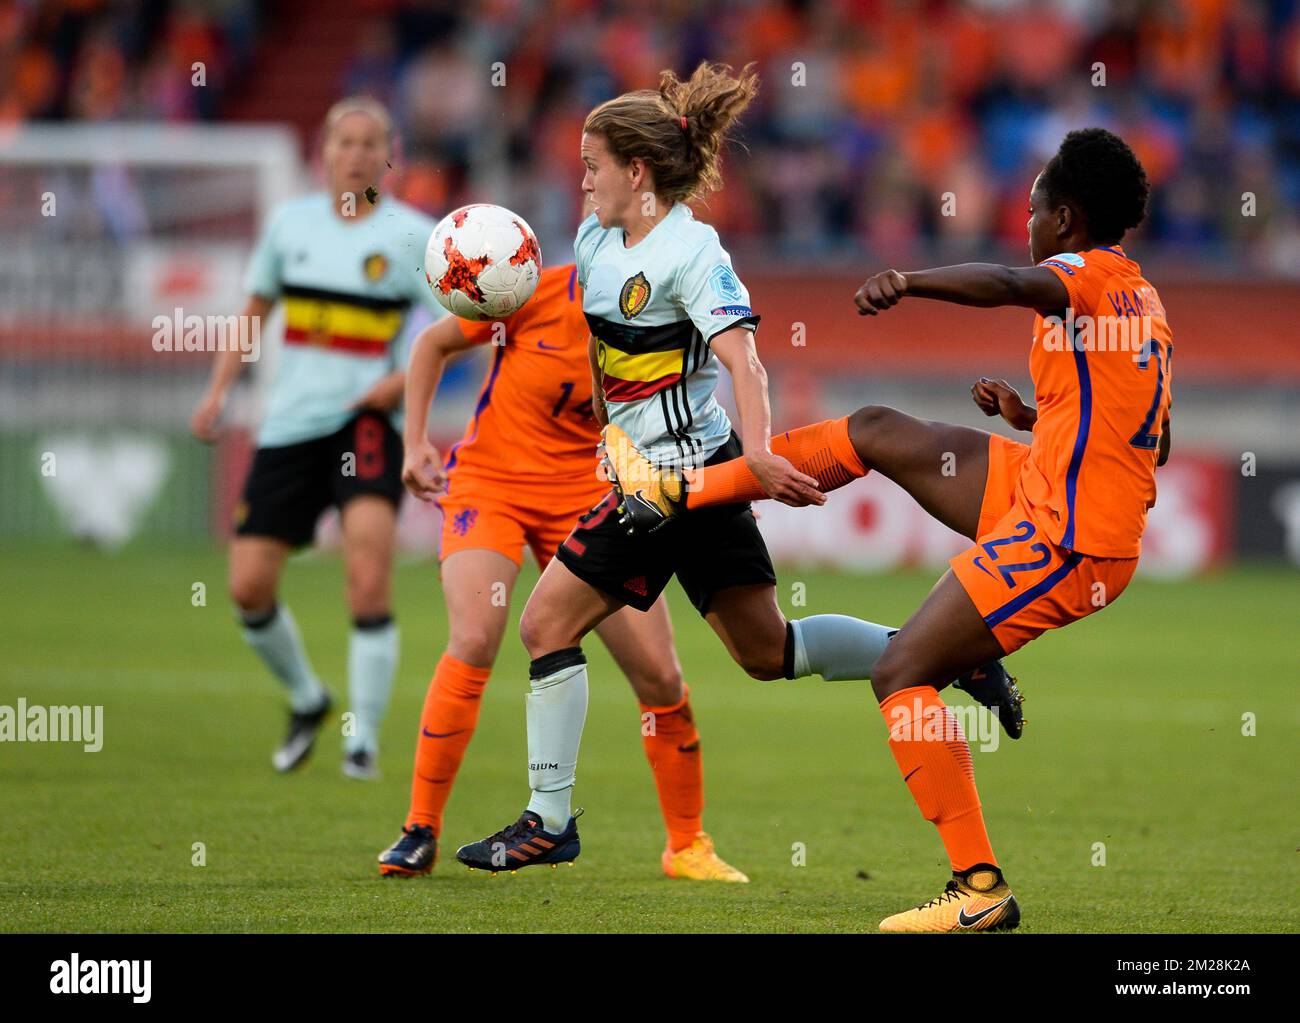 Belgium's Davina Philtjens and Dutch Liza van der Most pictured in action during a soccer game between Belgian national women's soccer team Red Flames and The Netherlands, the third game in group A in the group stage of the Women's European Championship 2017 in the Netherlands, Monday 24 July 2017 in Tilburg, The Netherlands. BELGA PHOTO DAVID CATRY Stock Photo